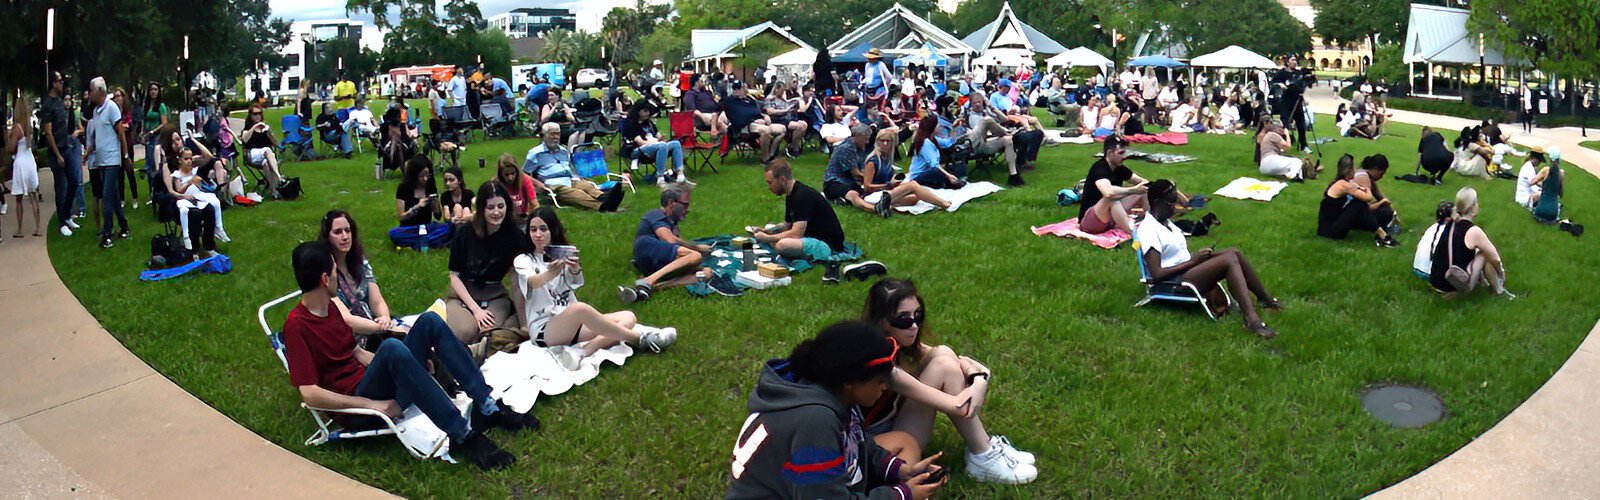 Festival goers at Water Works Park in Tampa await the start of the the first annual Dance Now, a cultural dance festival produced by Tampa City Ballet Artistic Director and choreographer Paula Nunez.